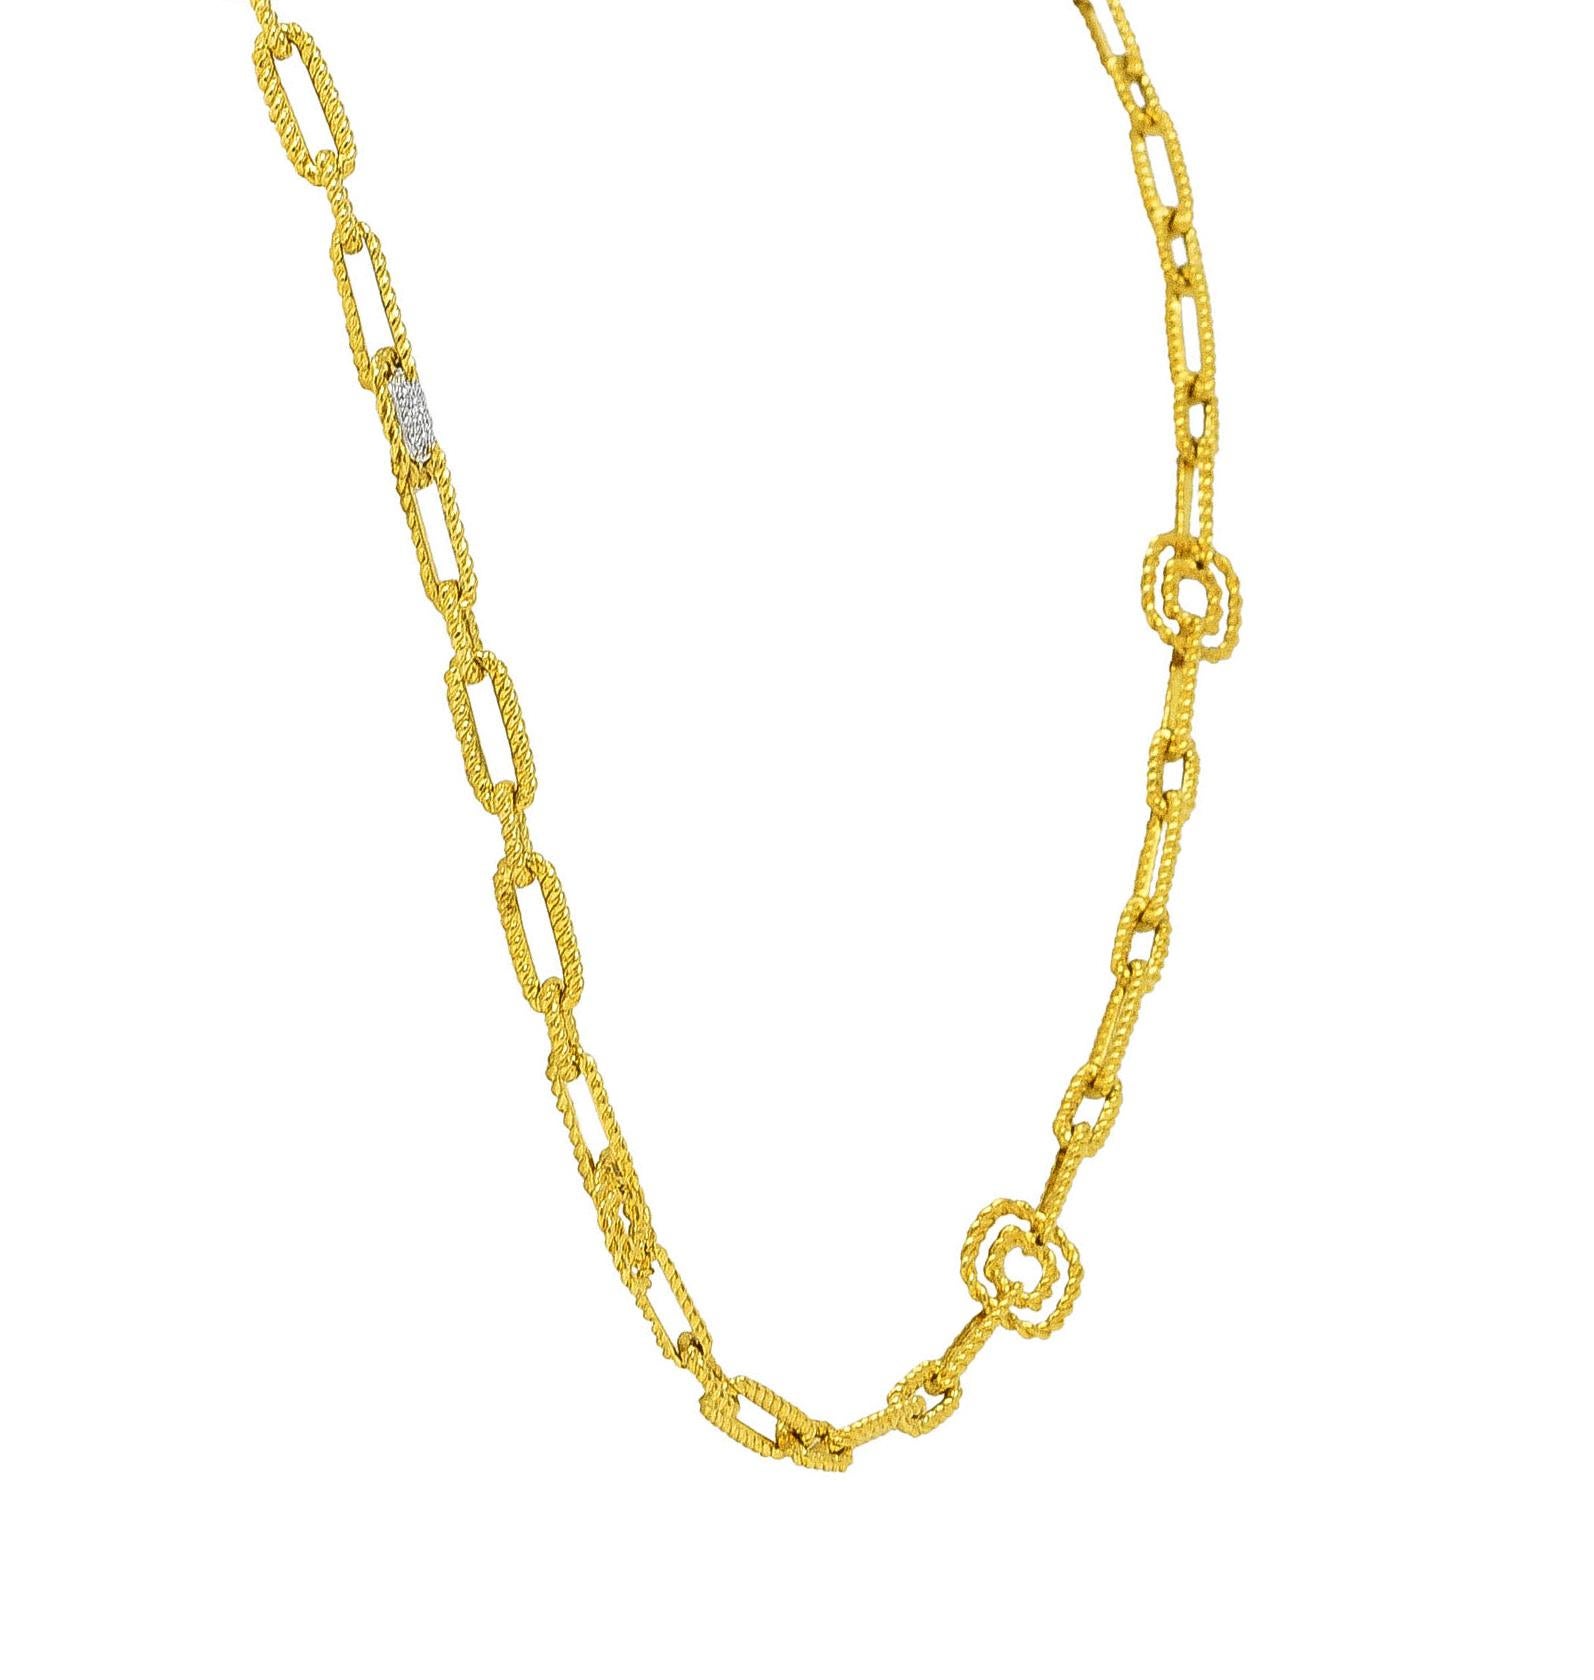 Contemporary Roberto Coin Vintage Diamond Two-Tone 18 Karat Gold Twisted Rope Chain Necklace